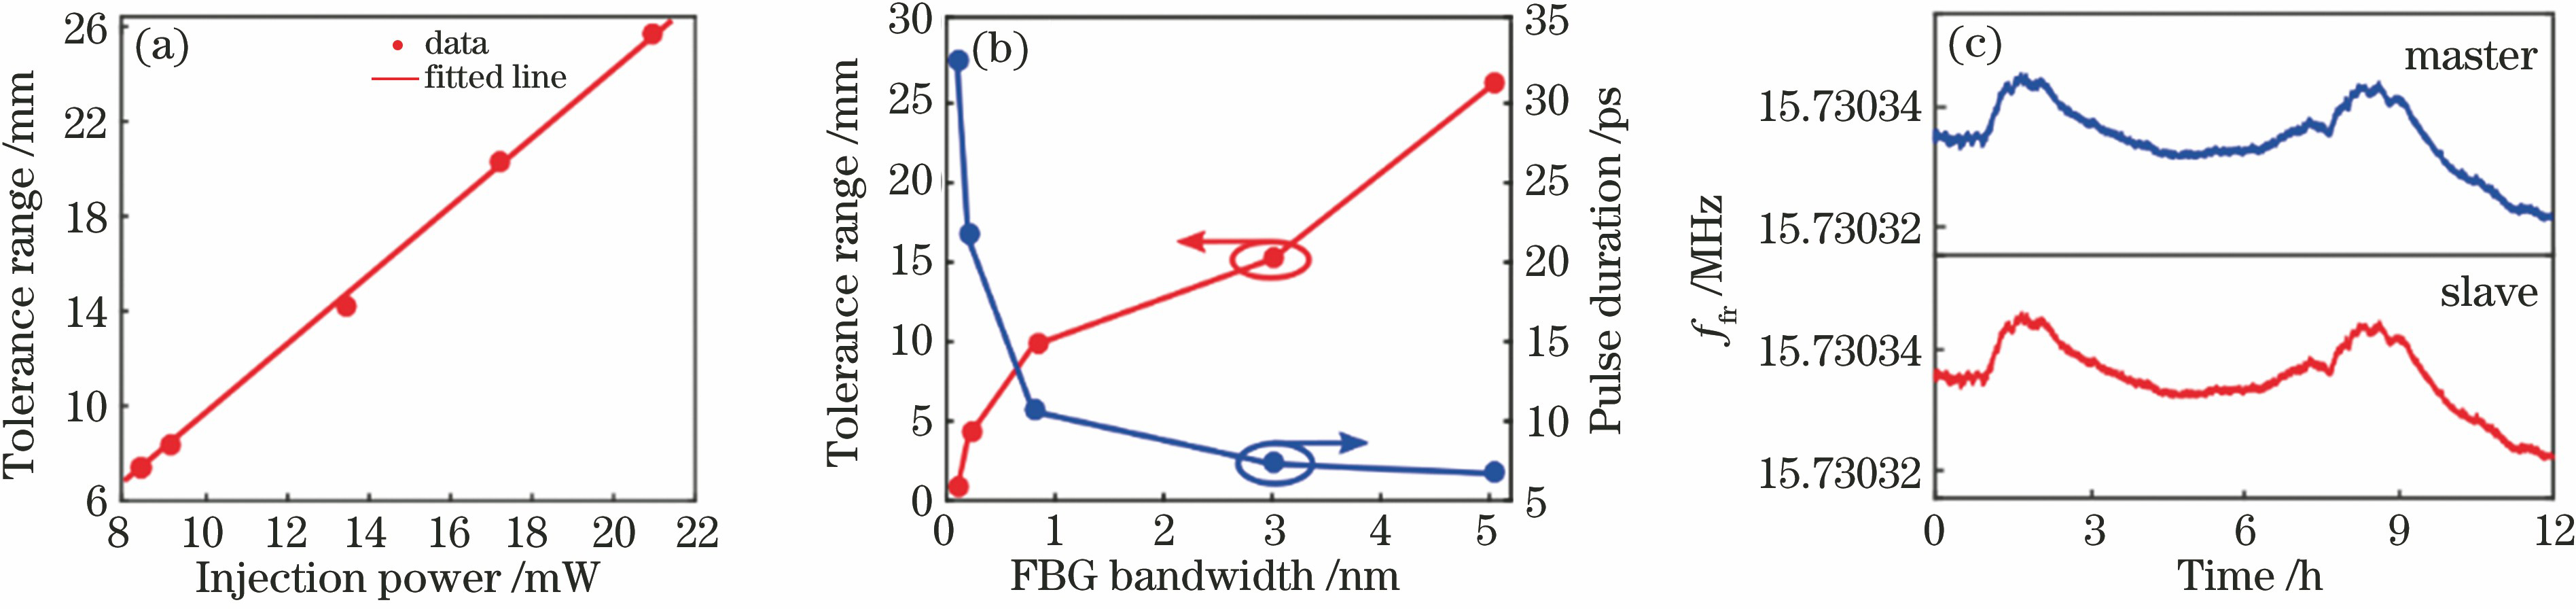 Optimization and long-term stability of synchronization systems. (a) Tolerance range of cavity-length mismatch versus injection power; (b) dependence of tolerance range of cavity-length mismatch and pulse duration on FBG bandwidth in slave laser; (c) long-term stability for synchronization system